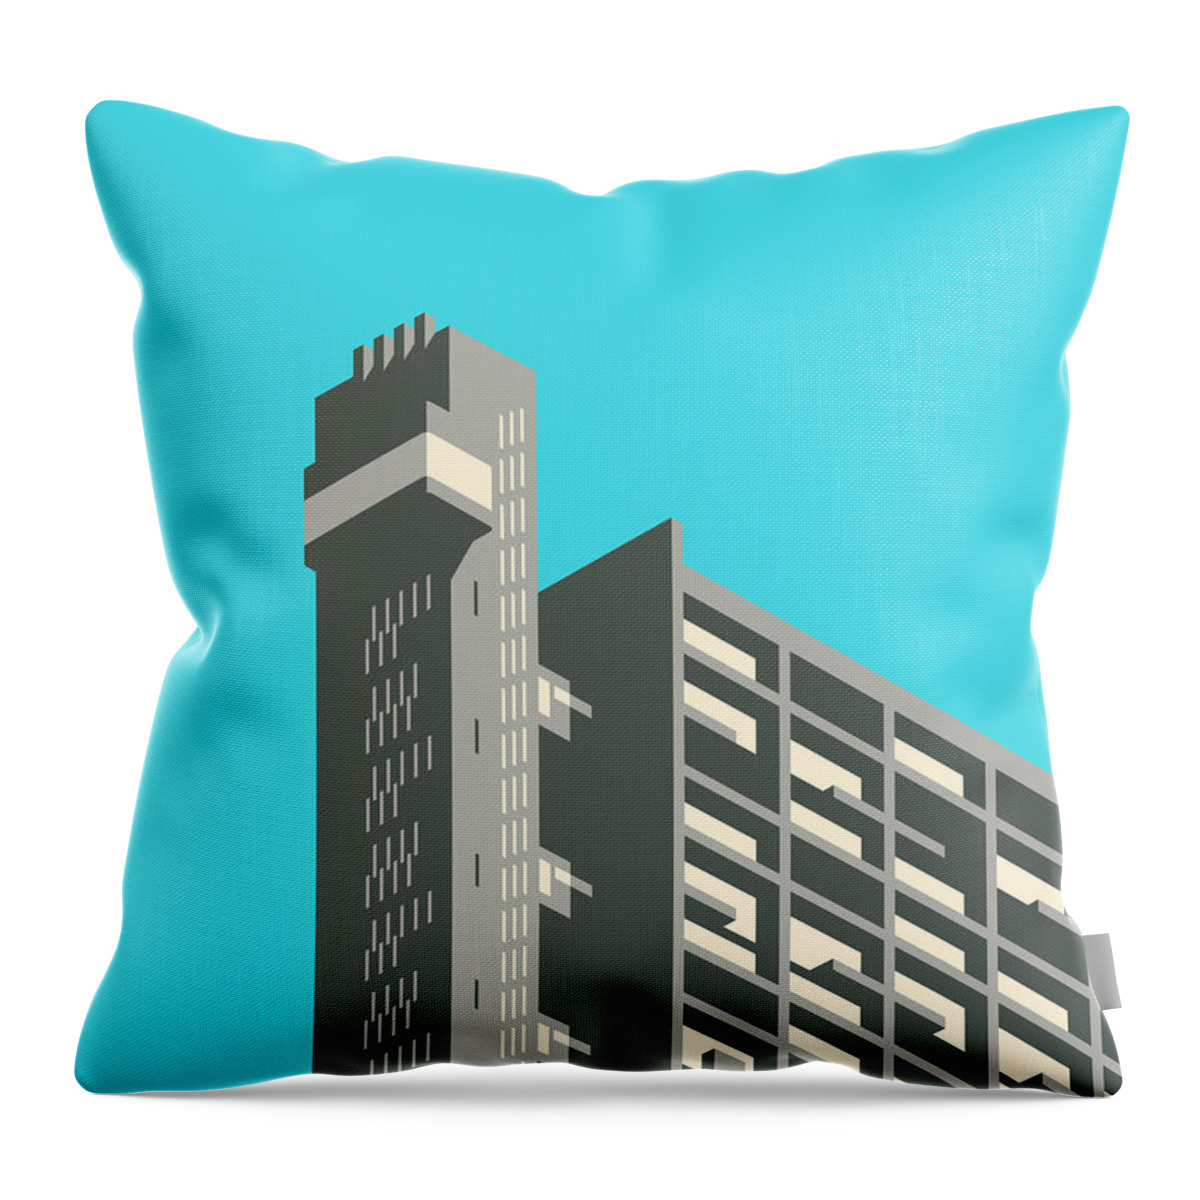 Trellick Throw Pillow featuring the digital art Trellick Tower London Brutalist Architecture - Cyan by Organic Synthesis